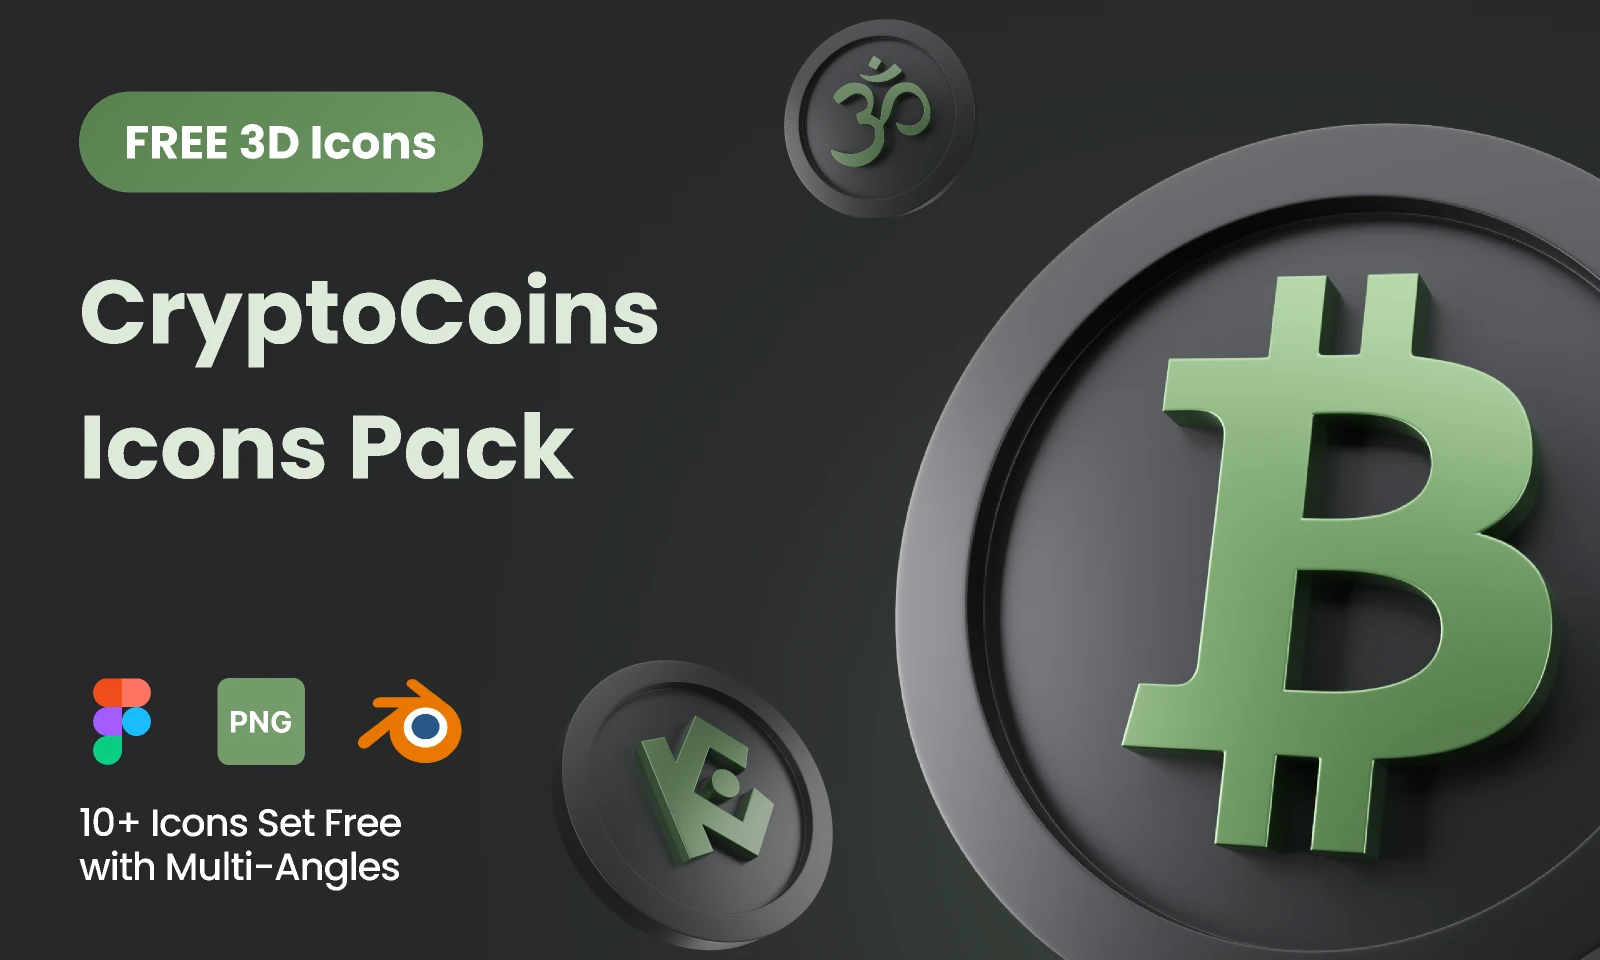 Cricoins - Cryptocoins 3D Icon Pack for Figma and Adobe XD